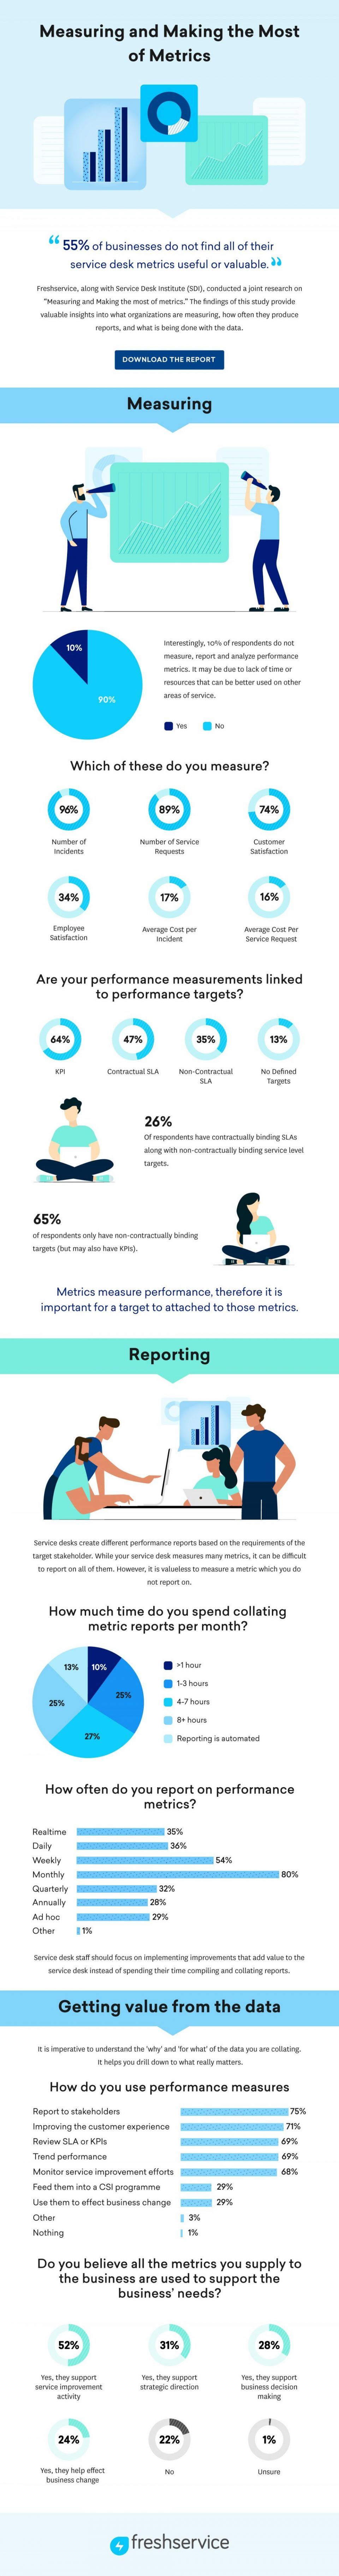 Measuring And Making The Most Of Metrics [Infographic]